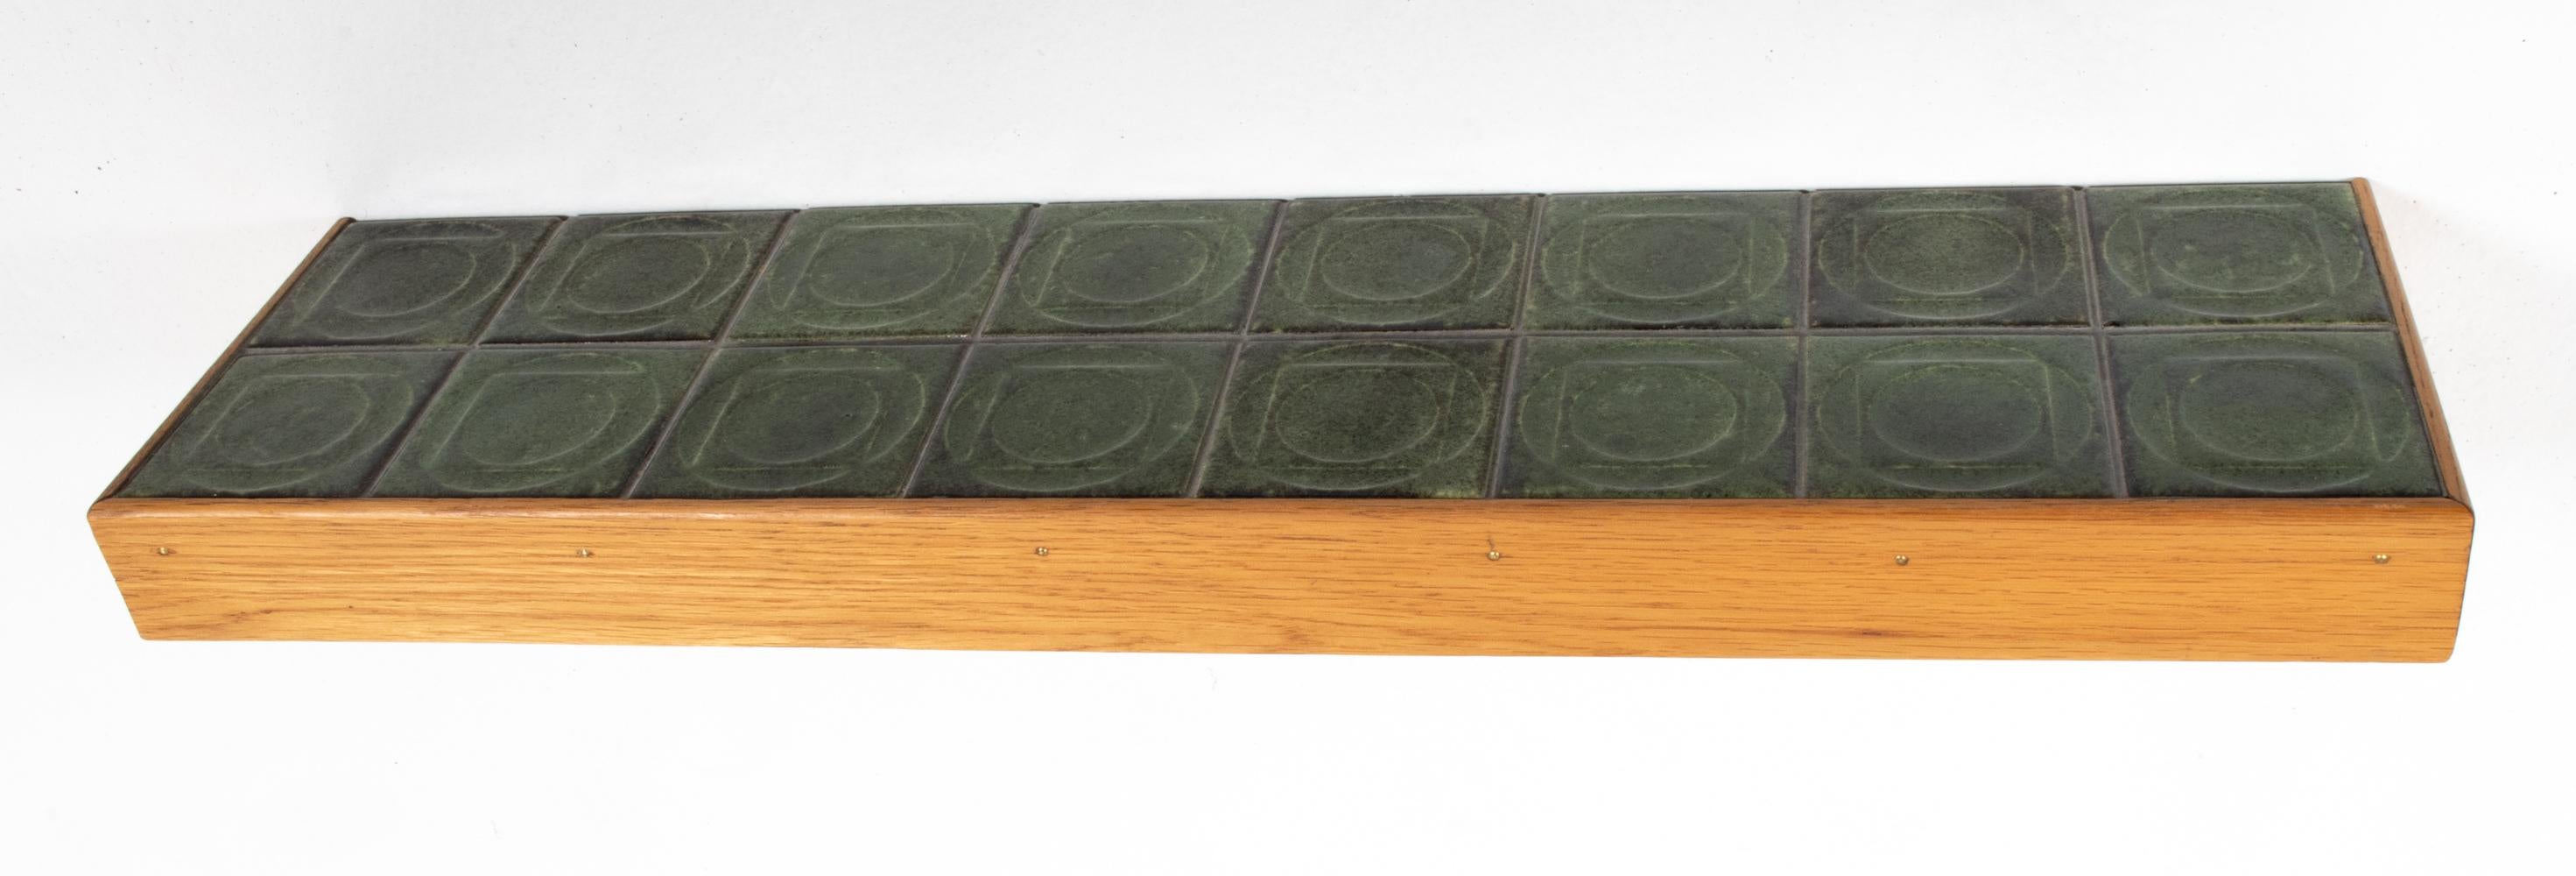 Bodil Eje-Style Danish Mid-Century Ceramic Tile Wall Mirror & Shelf In Good Condition For Sale In Norwalk, CT